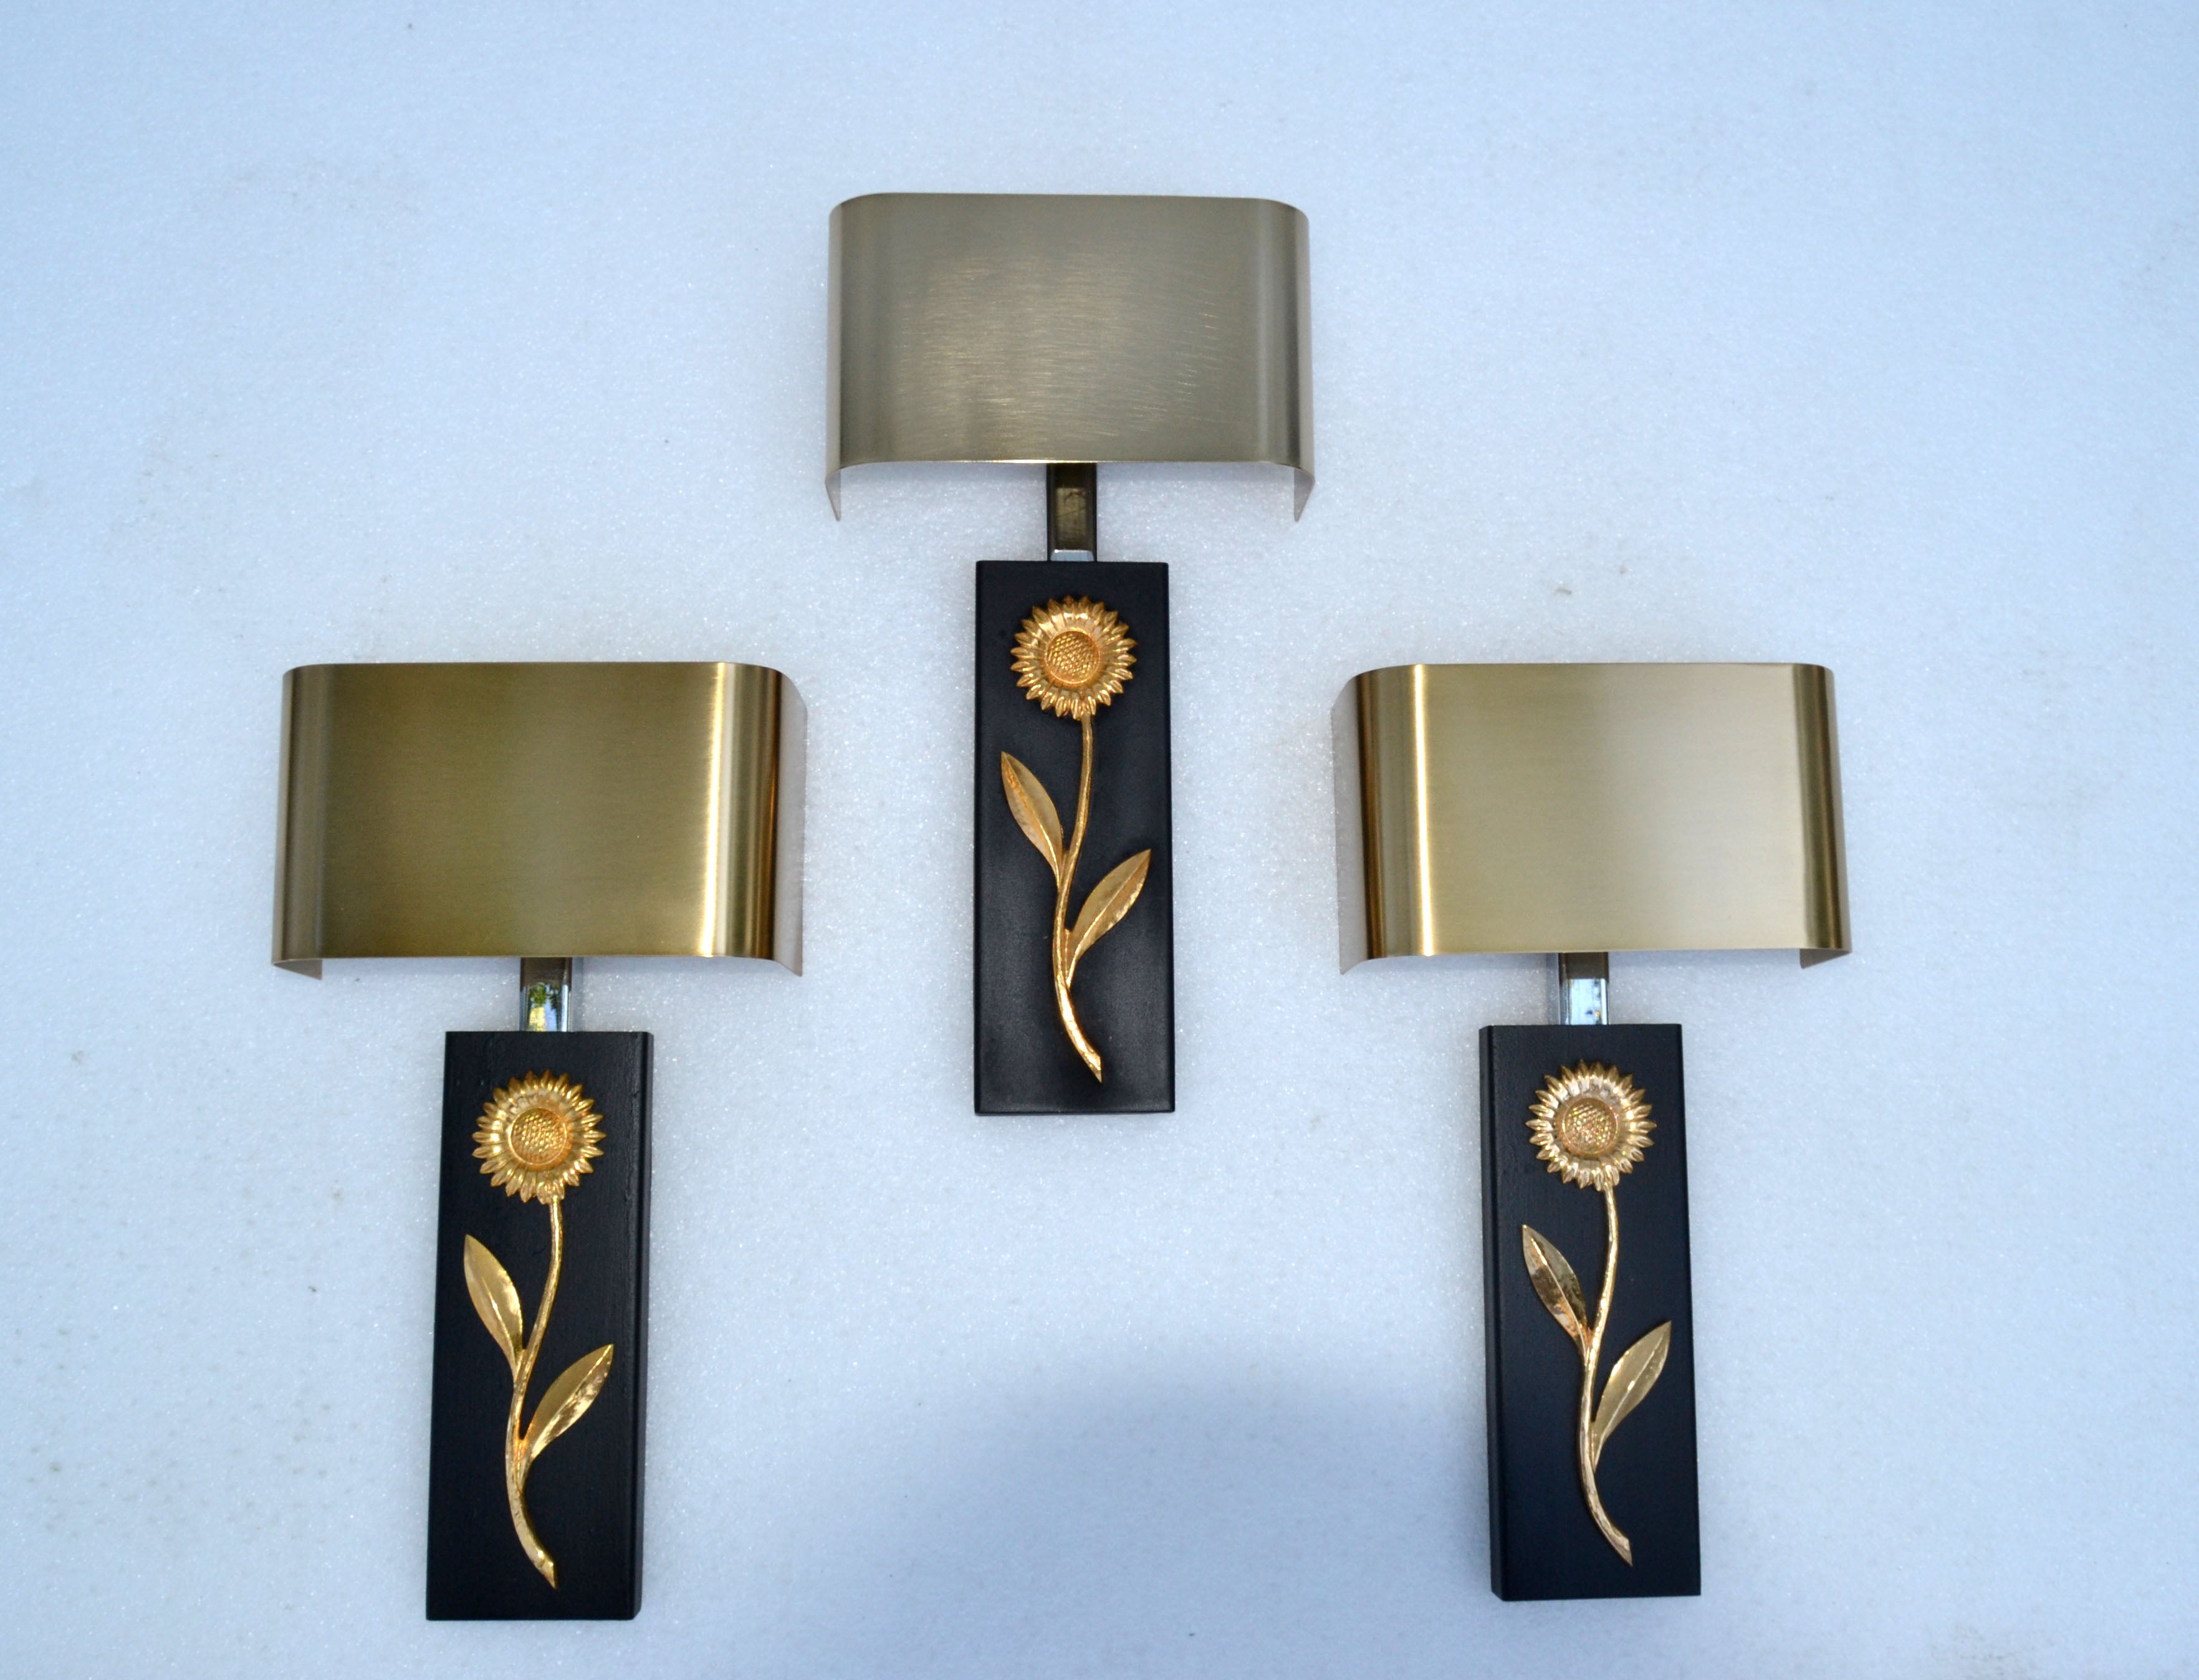 Superb set of 3 wall sconces with bronze flower decor on black frame topped with a brushed brass rectangular shade in the style of Maison Charles.
French Mid-Century Modern and designed in 1970.
US rewiring and each Sconce takes 2 candelabra light